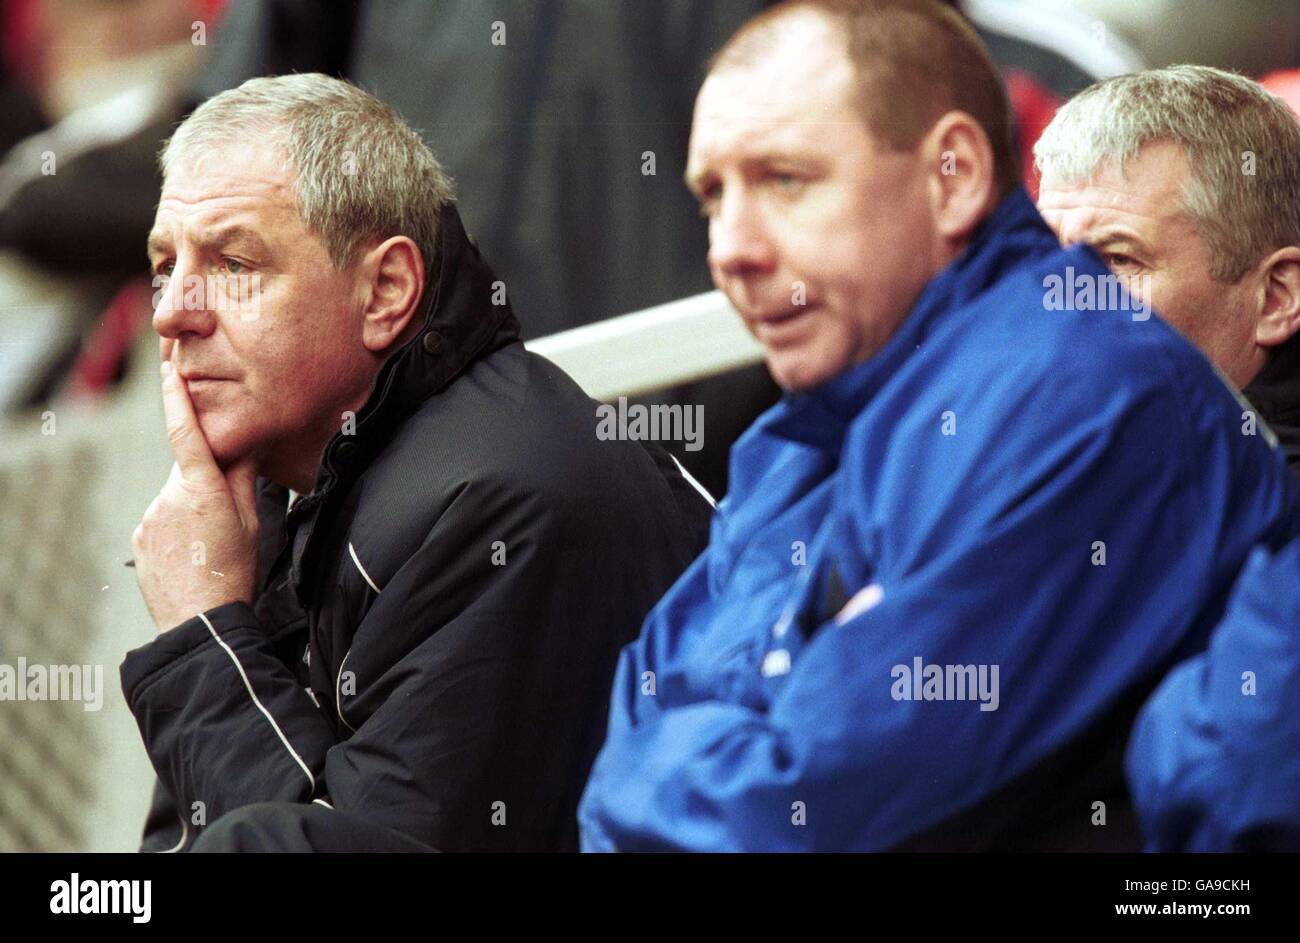 Soccer - AXA FA Cup - Quarter Final - Middlesbrough v Everton. Everton's Walter Smith looks on during the 3-0 defeat to Middlesbrough Stock Photo